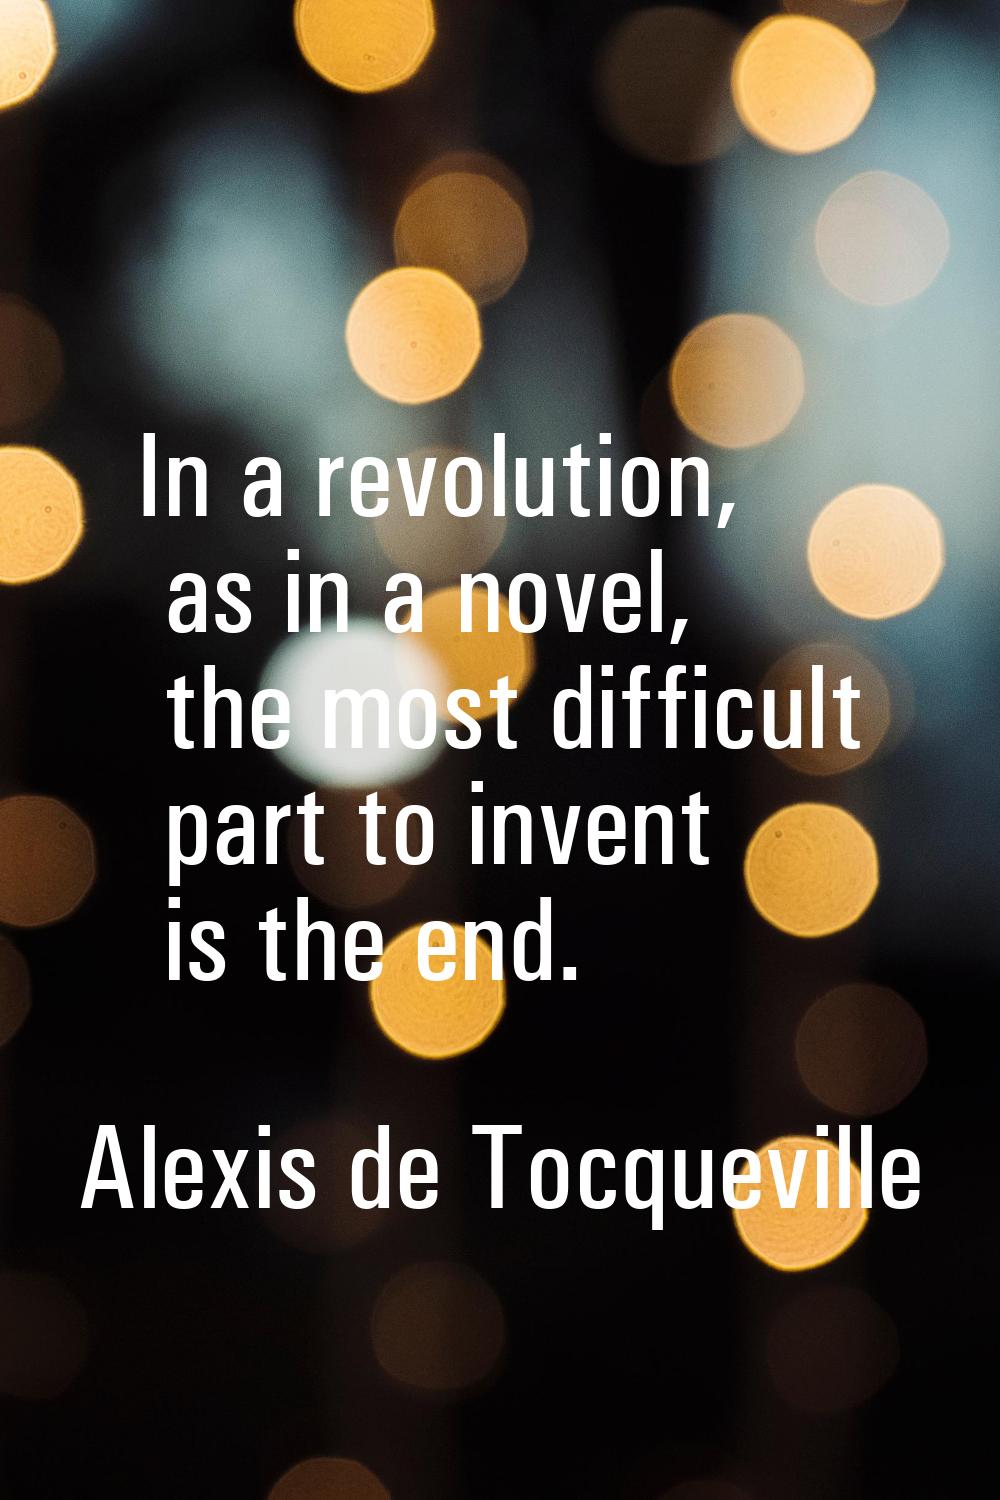 In a revolution, as in a novel, the most difficult part to invent is the end.